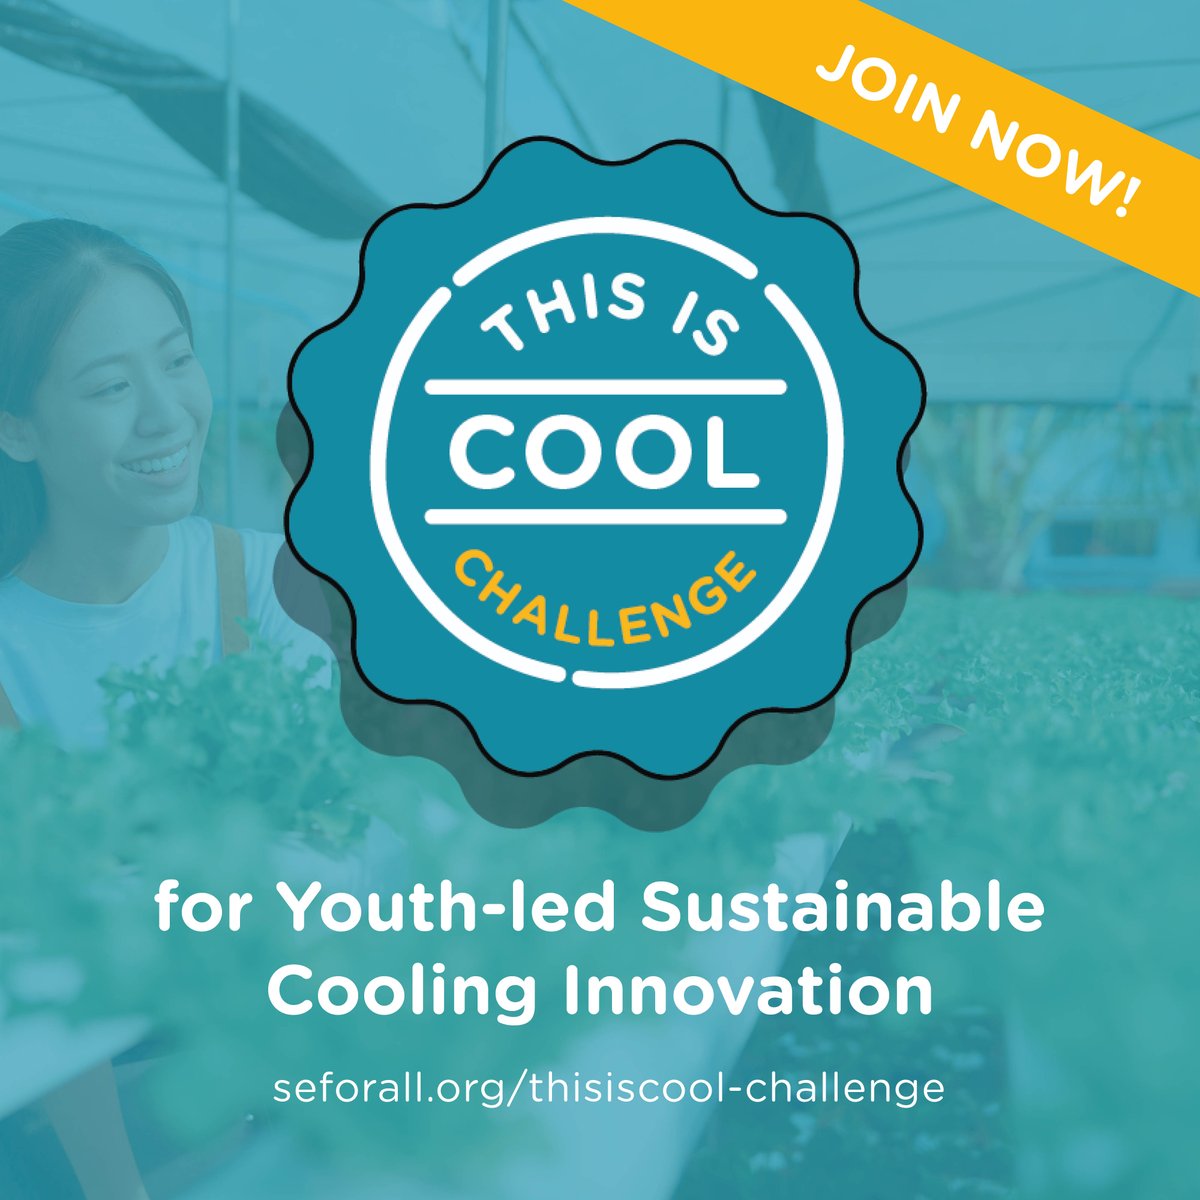 📢Attention young innovators: applications for the #ThisIsCool Challenge 2023 are now open!

Do you have innovative 🧊 #sustainablecooling solutions? Do you want to make a difference and provide #CoolingForAll? This challenge is for you!

Apply now ➡️ seforall.org/thisiscool-cha…